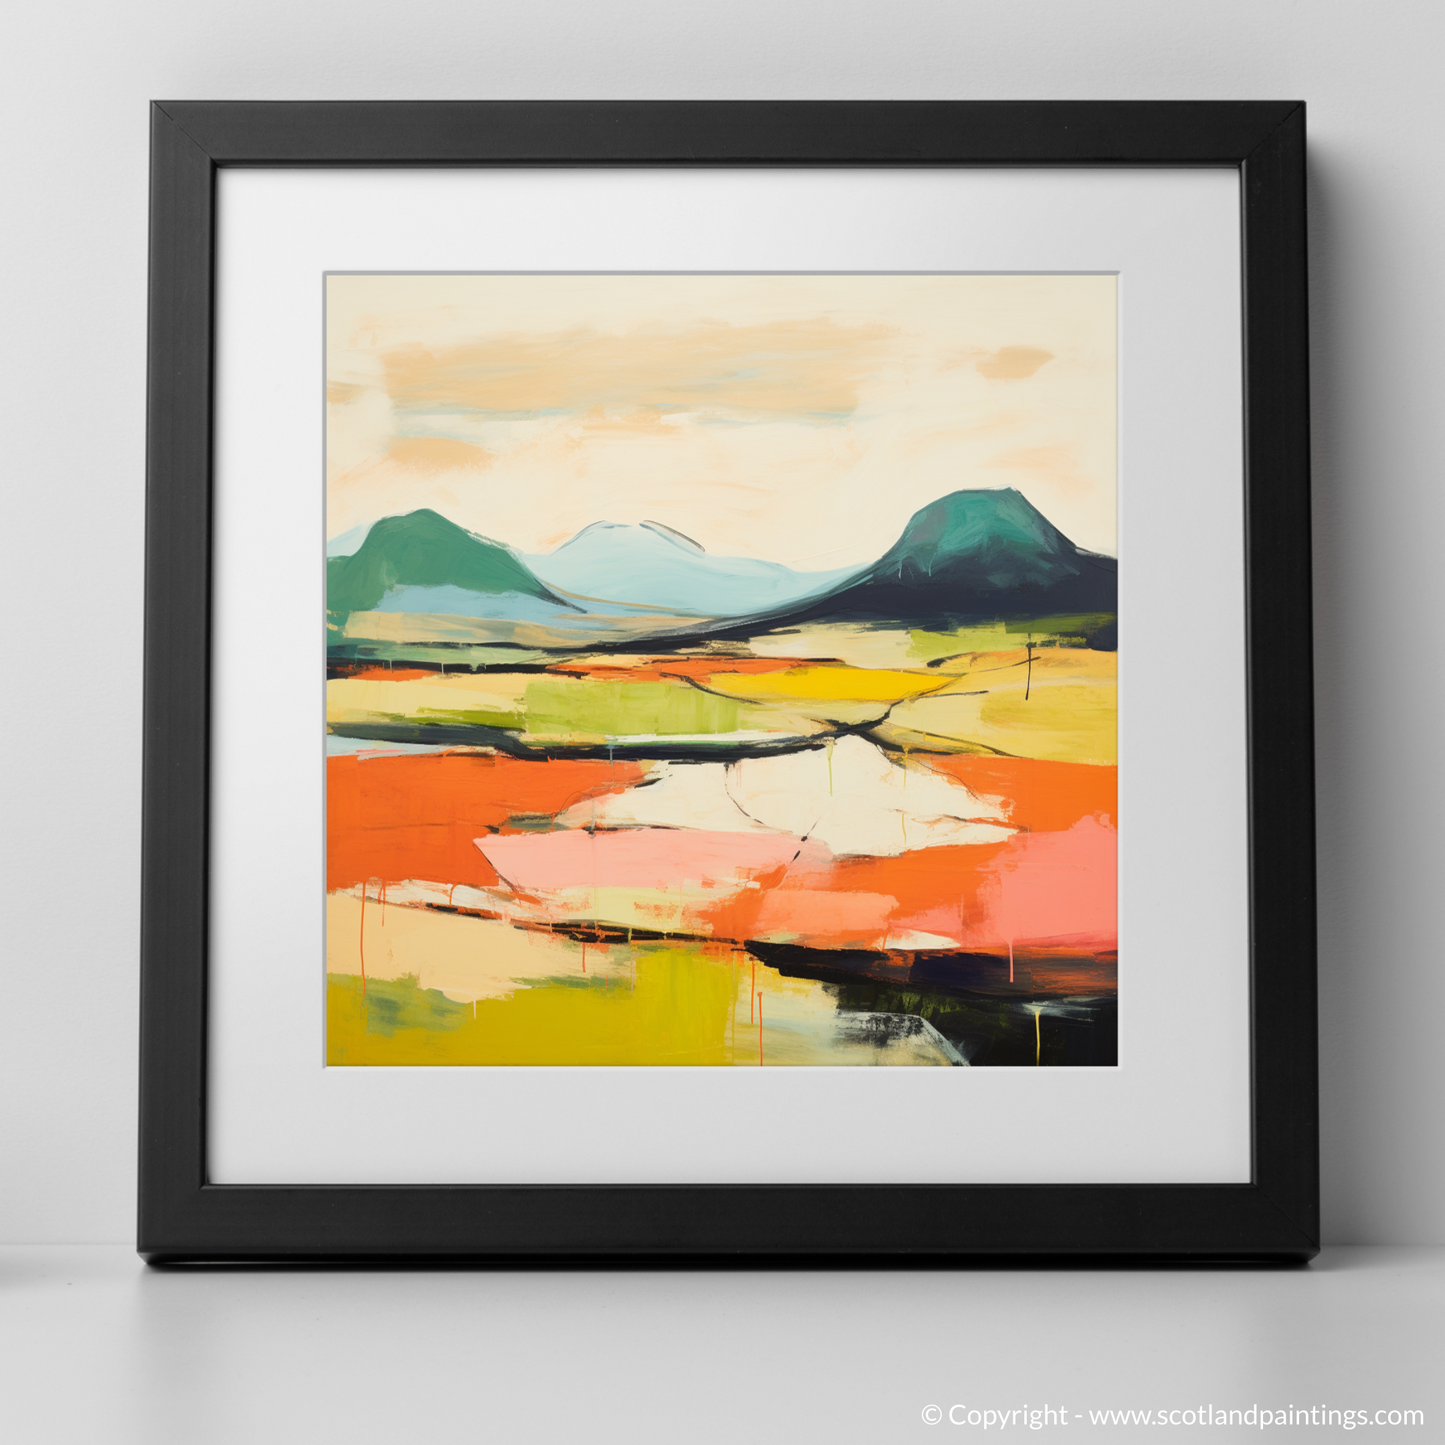 Art Print of Geal-chàrn (Drumochter) with a black frame